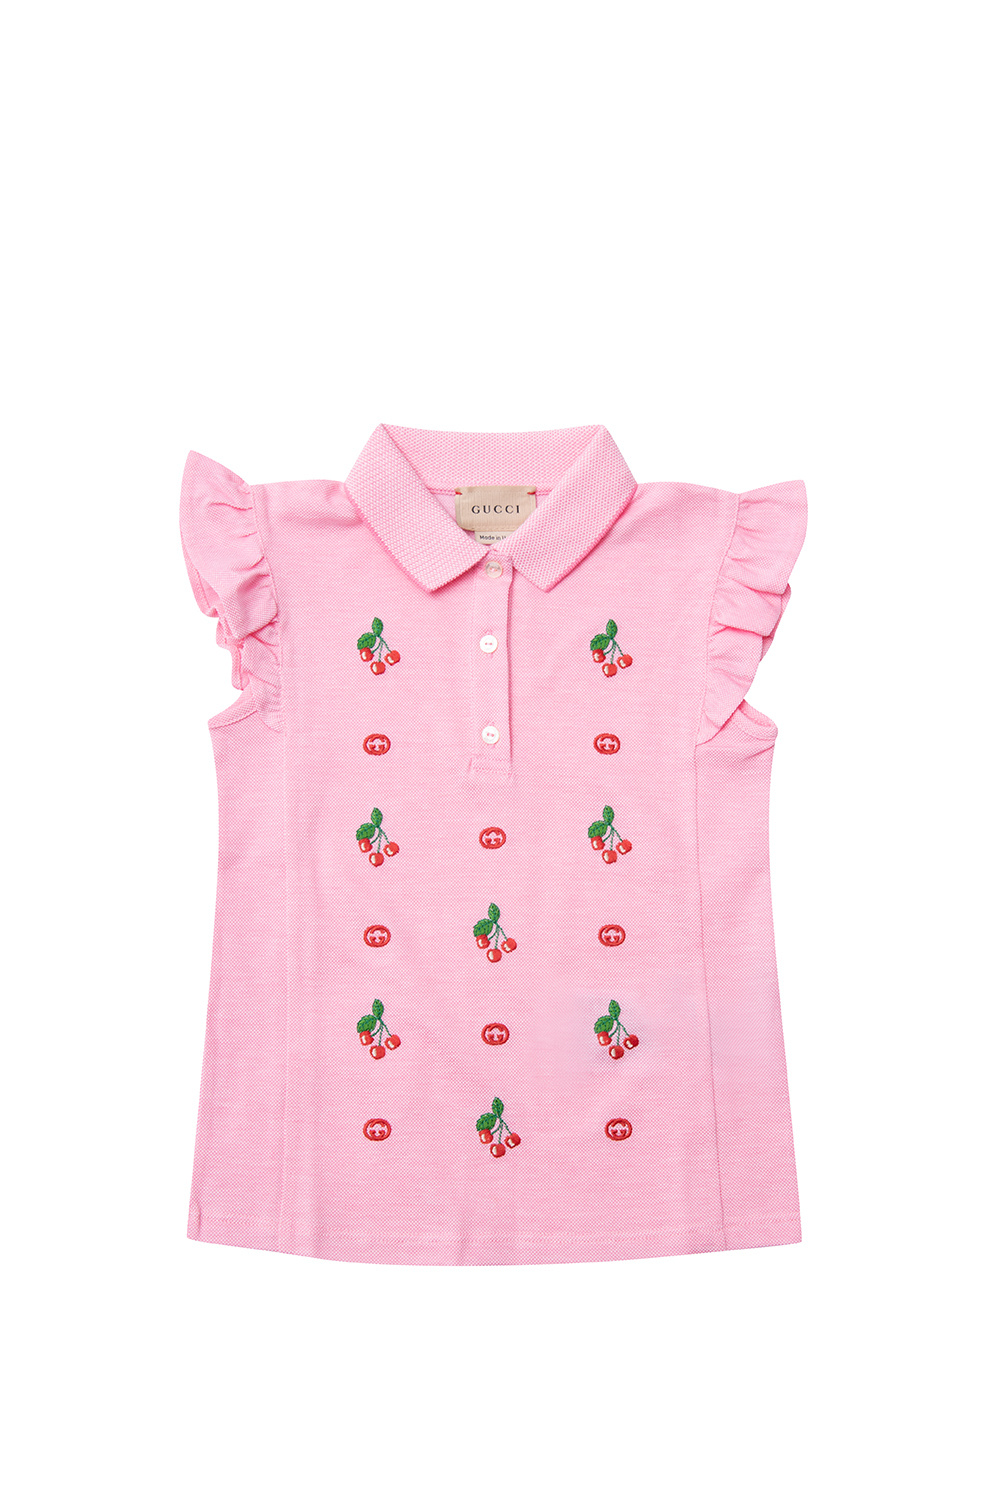 Gucci Kids Polo Blanc taille Us Voir